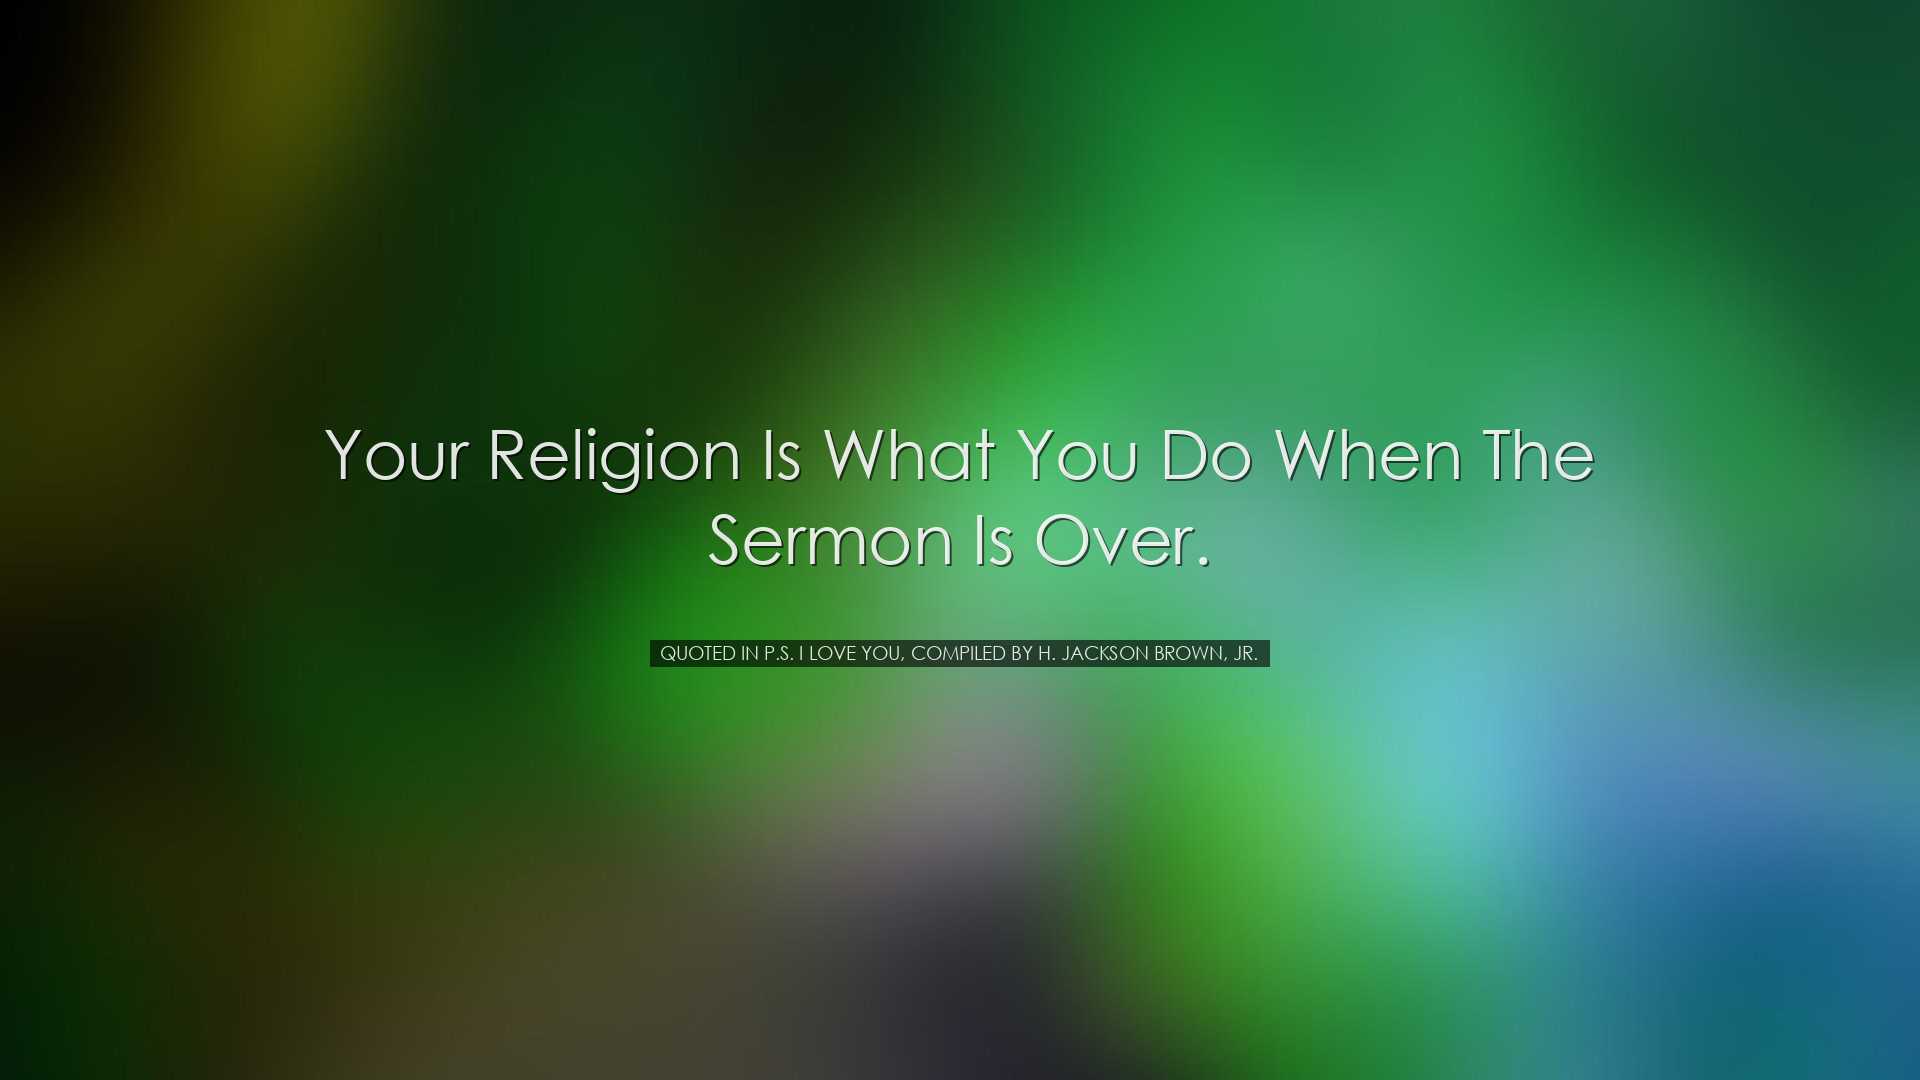 Your religion is what you do when the sermon is over. - Quoted in